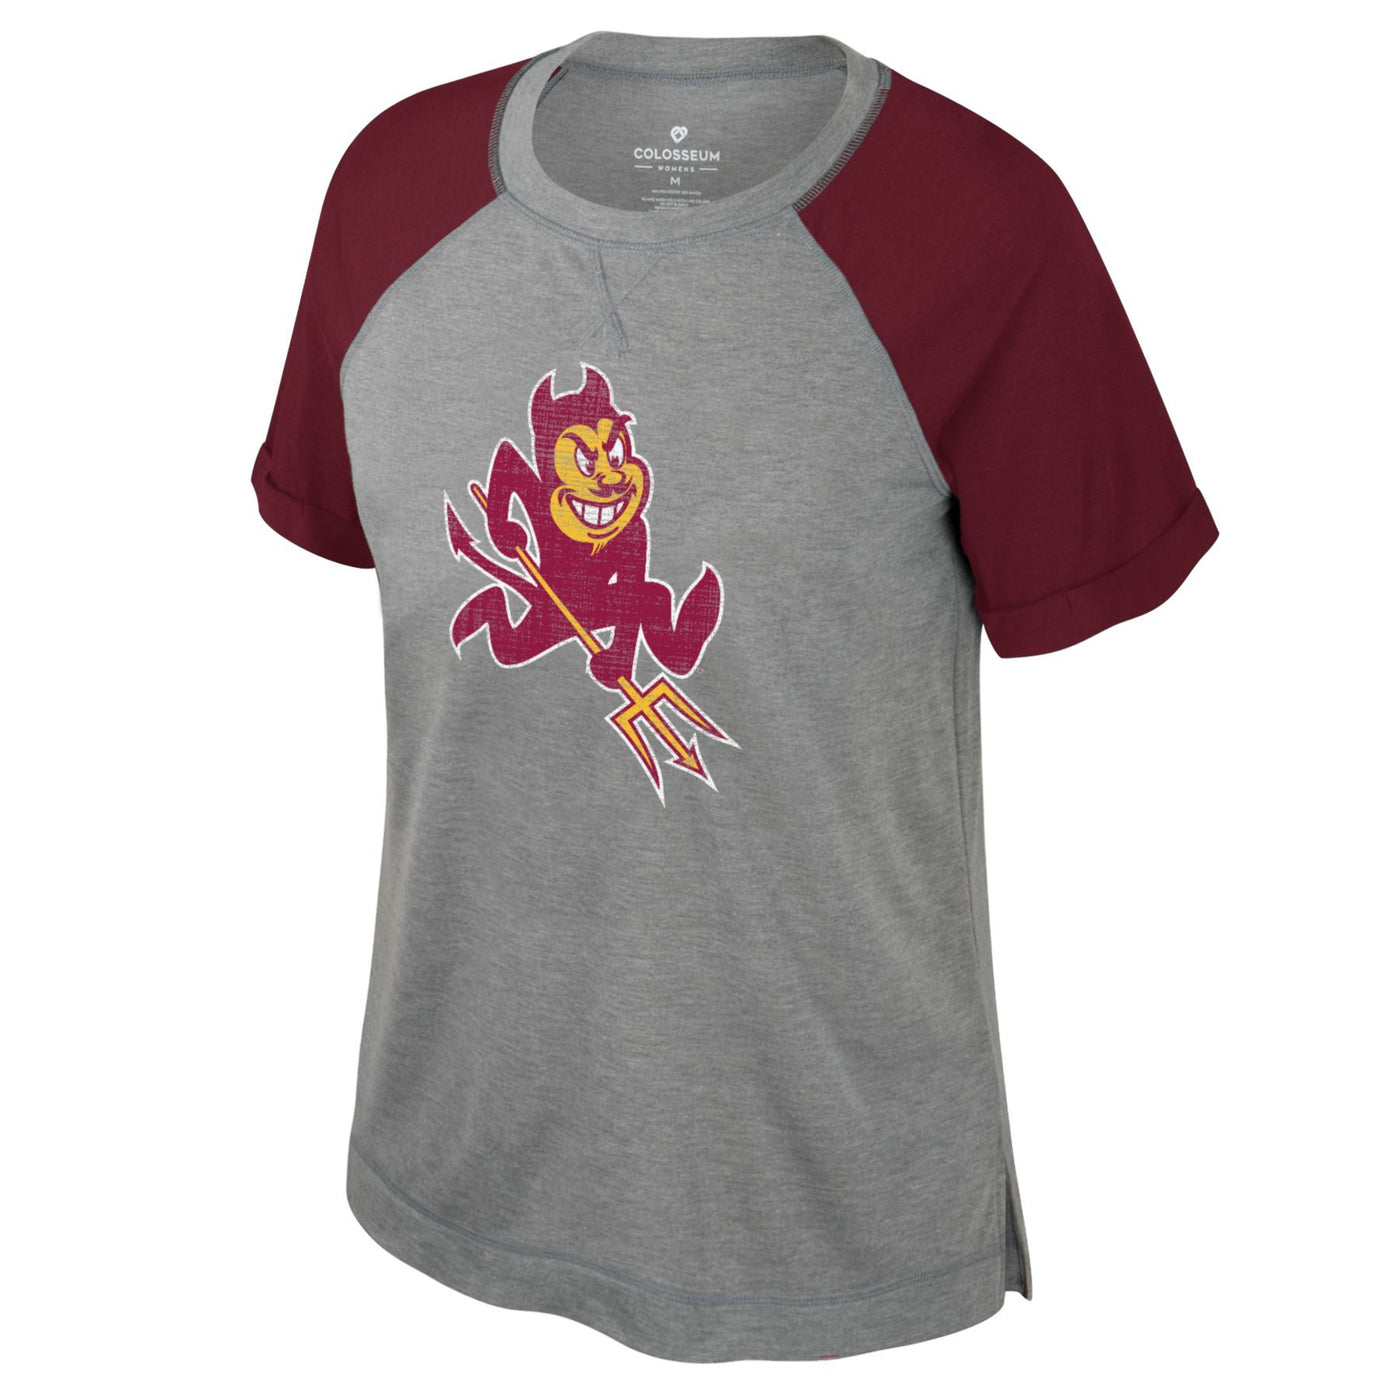 ASU grey ladies short sleeve tee with maroon sleeves and a sparky mascot on the front.